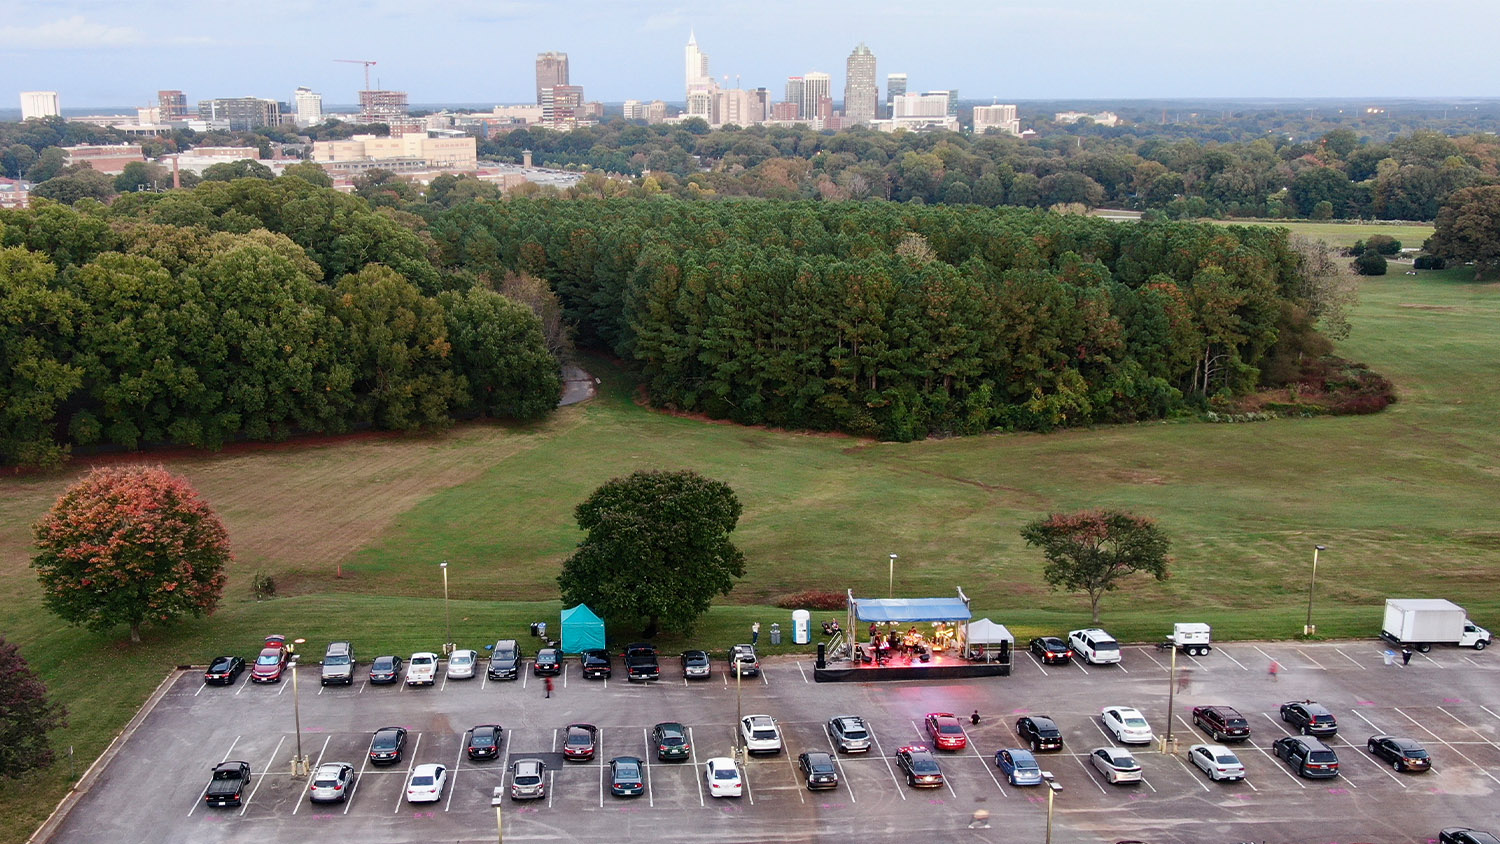 Vehicles in the parking lot on Centennial Campus for the Rissi Palmer drive-in concert this fall